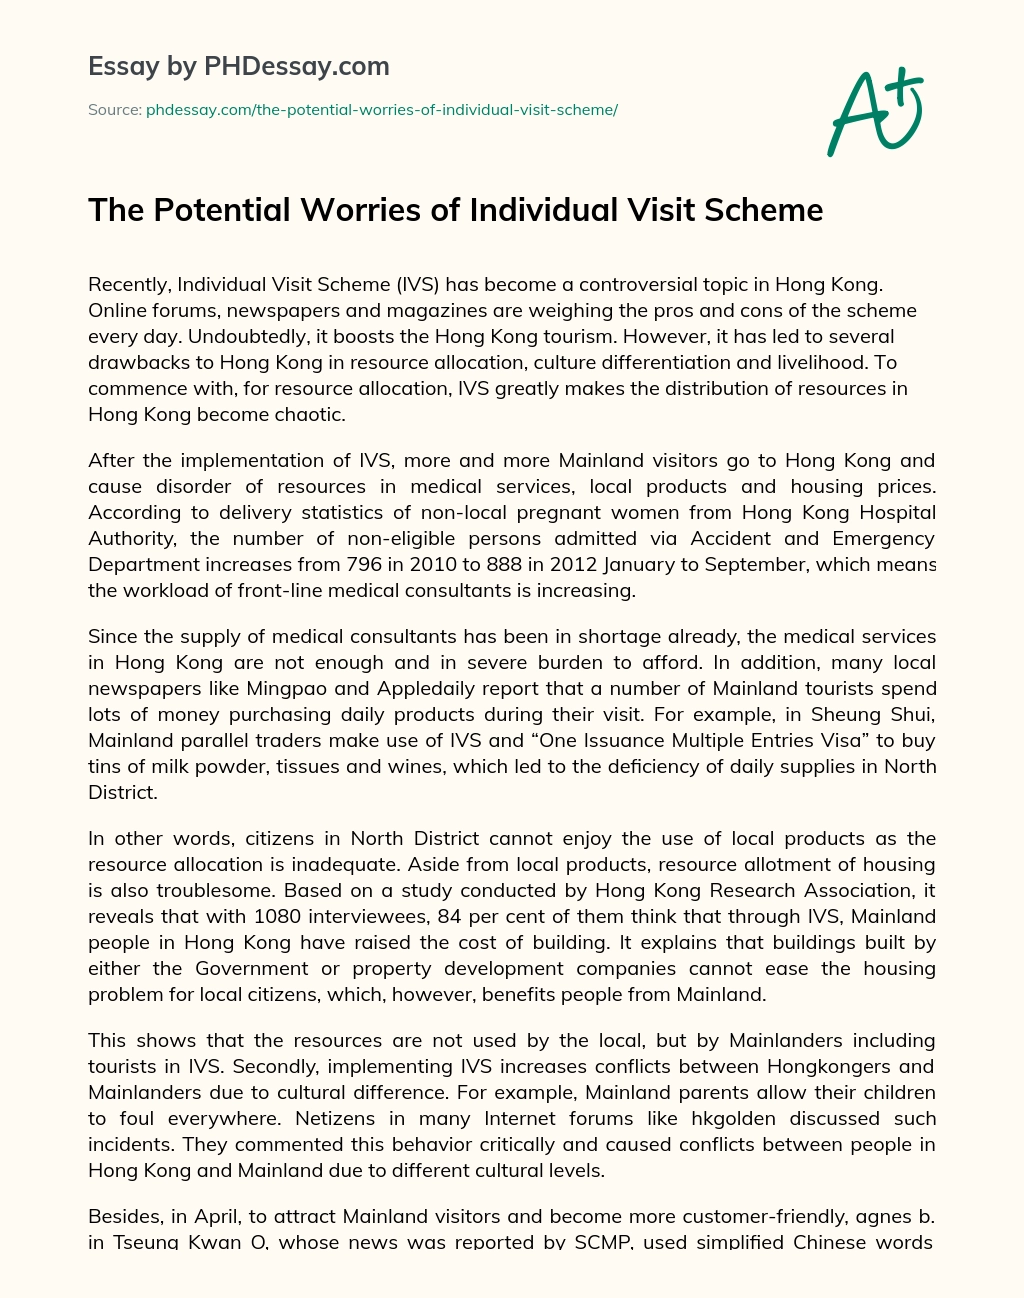 The Potential Worries of Individual Visit Scheme essay